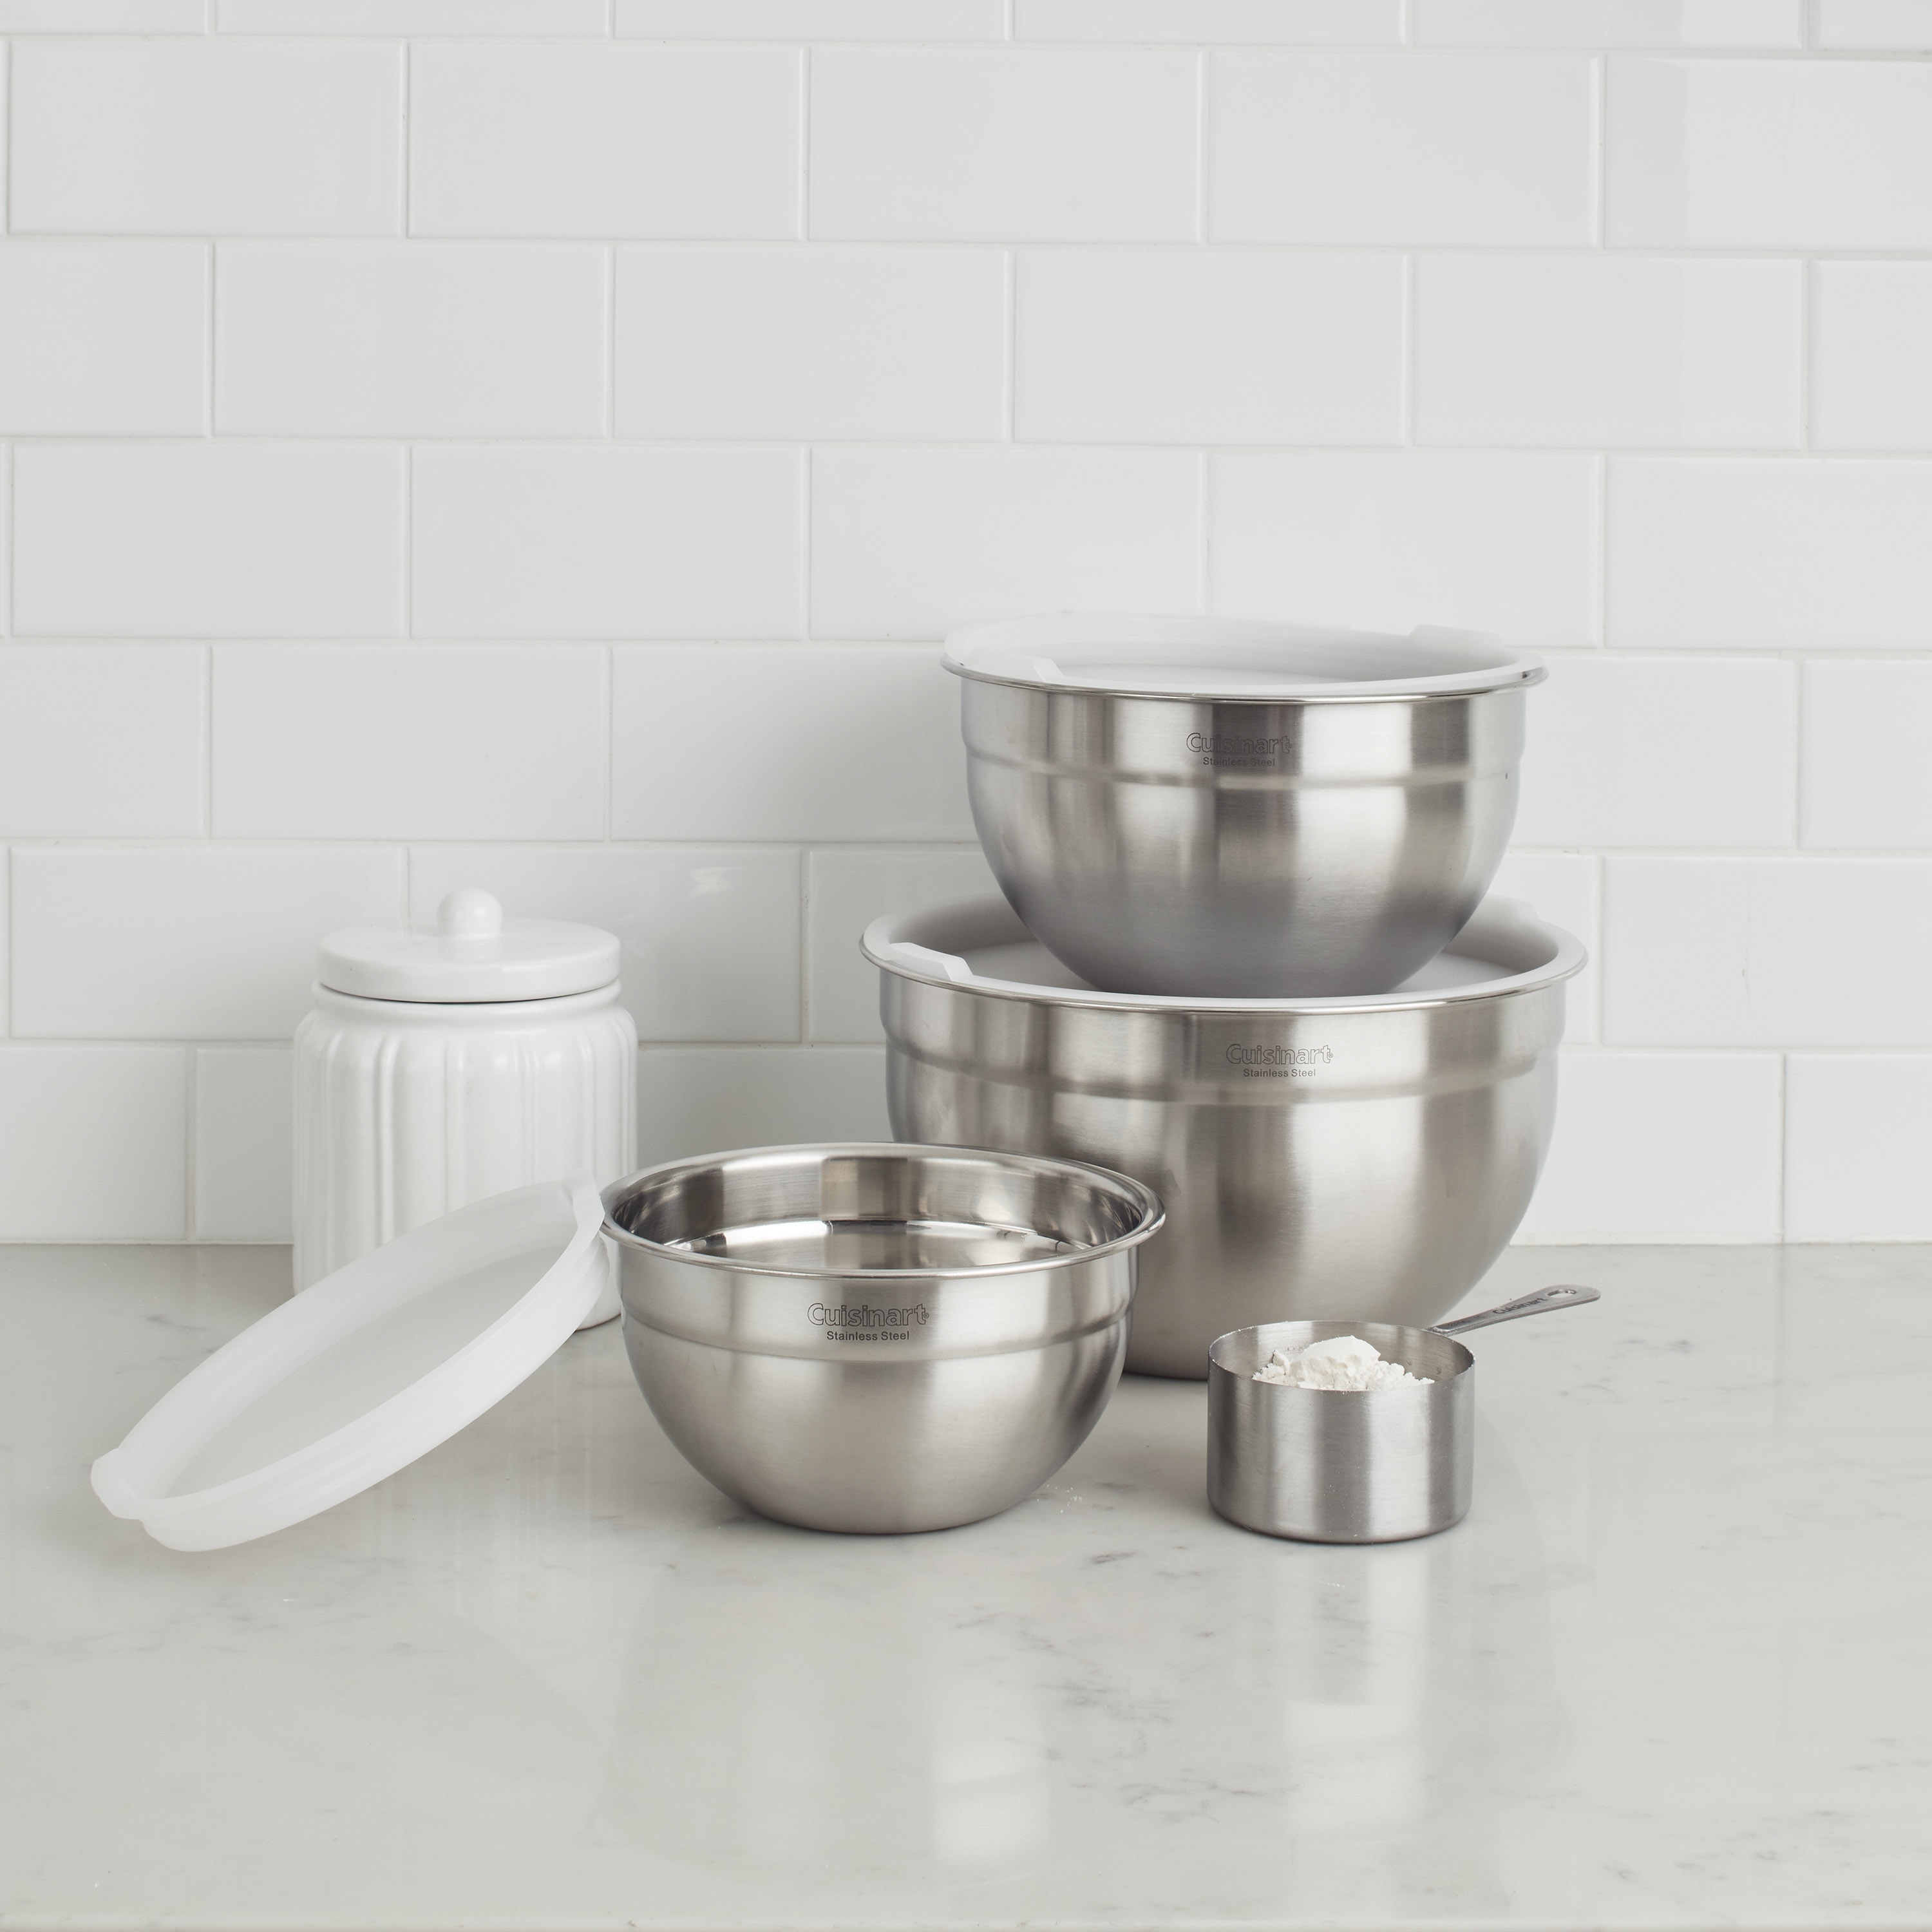 https://www.momjunction.com/wp-content/uploads/product-images/cuisinart-stainless-steel-mixing-bowls_afl903.jpg